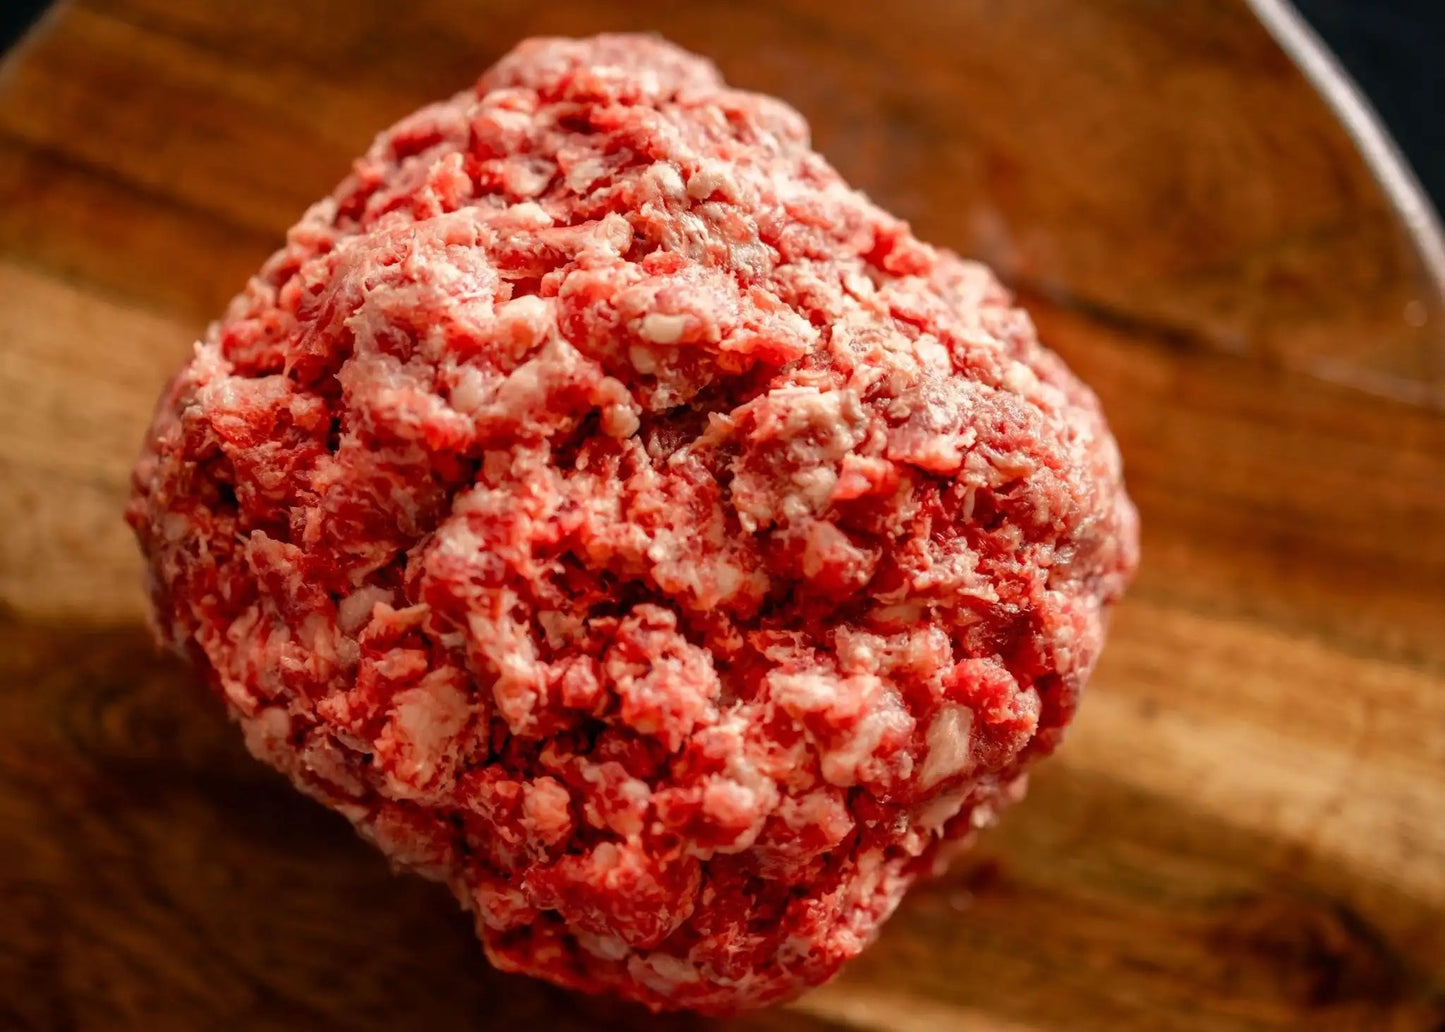 100% All-Natural Grass-Fed Pasture-Raised Wagyu Ground Beef - The Hufeisen-Ranch (WYO Wagyu)